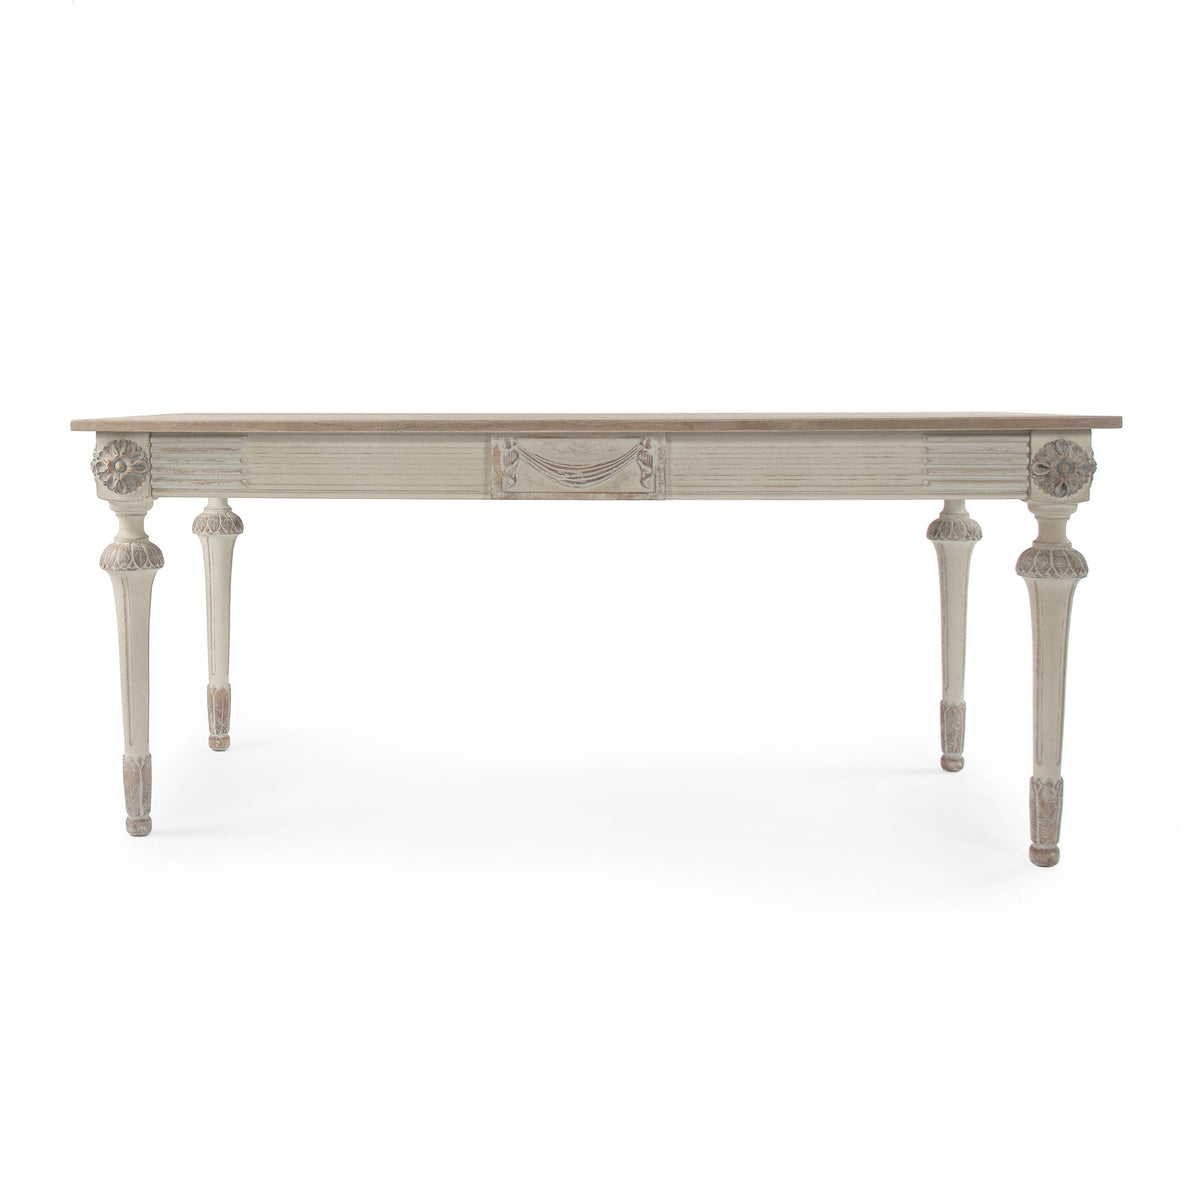 Bastian Dining Table by Zentique